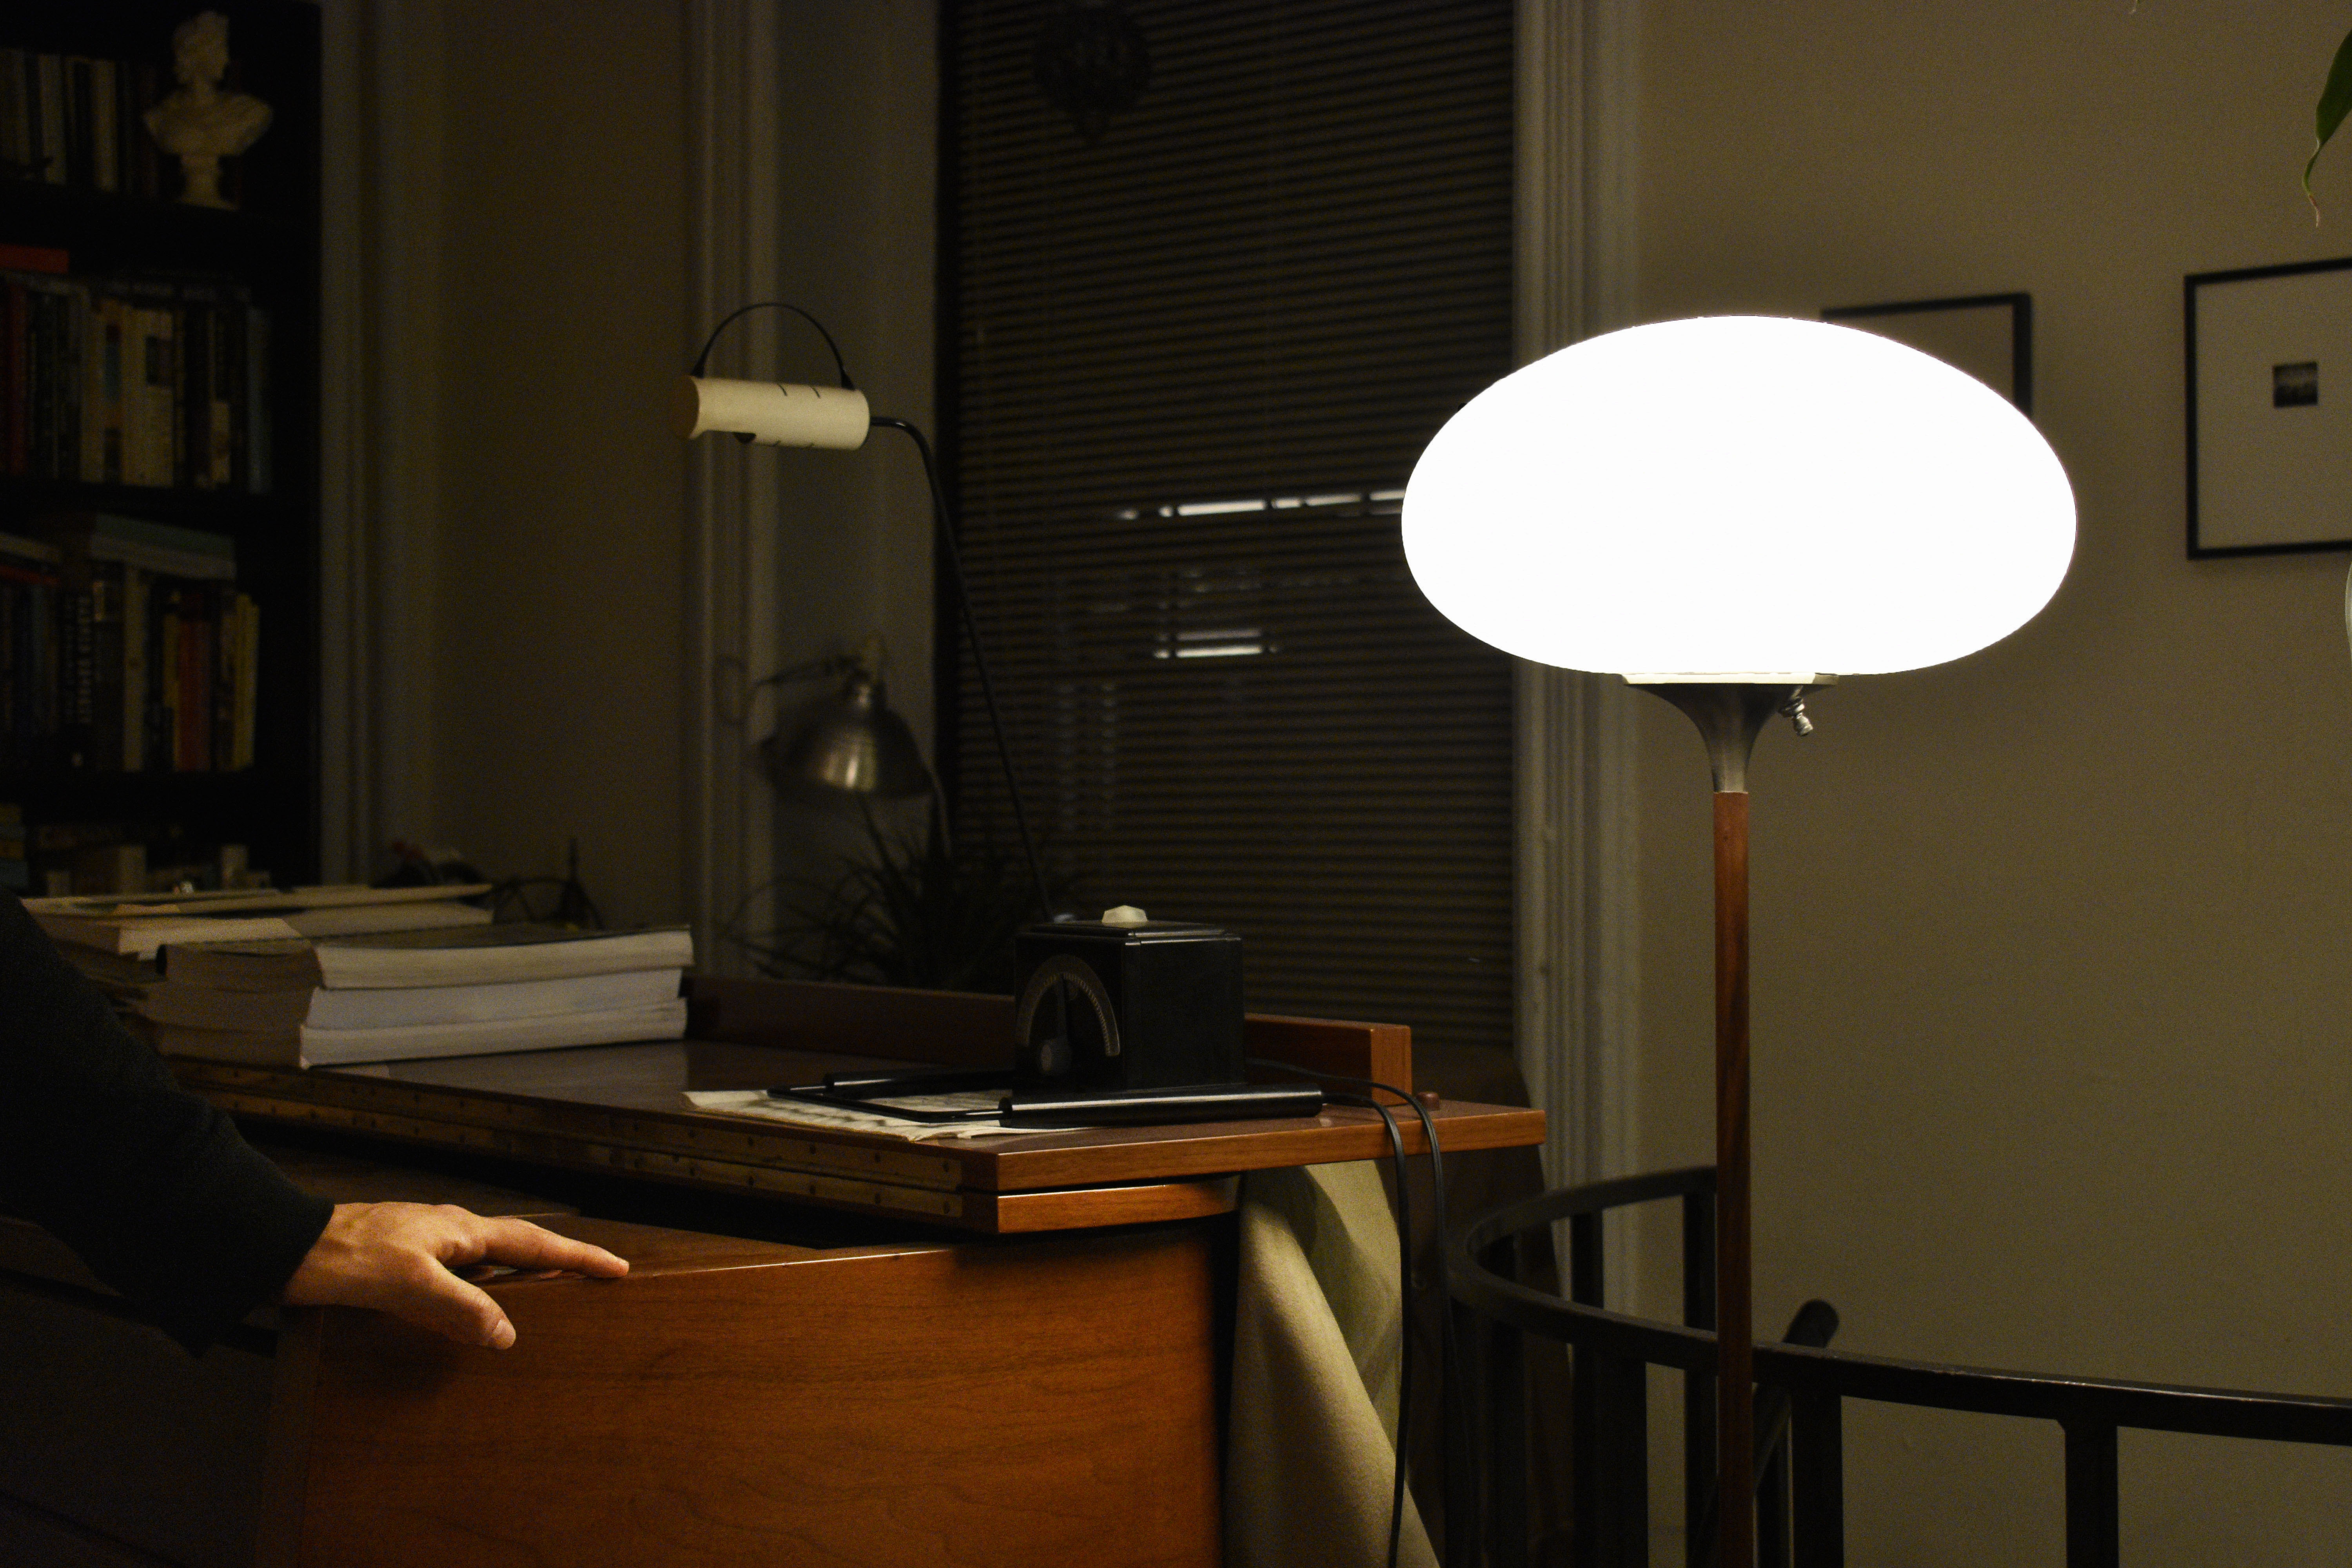 Ben leaning on the piano in his apartment, with a large, bright lamp right of frame.